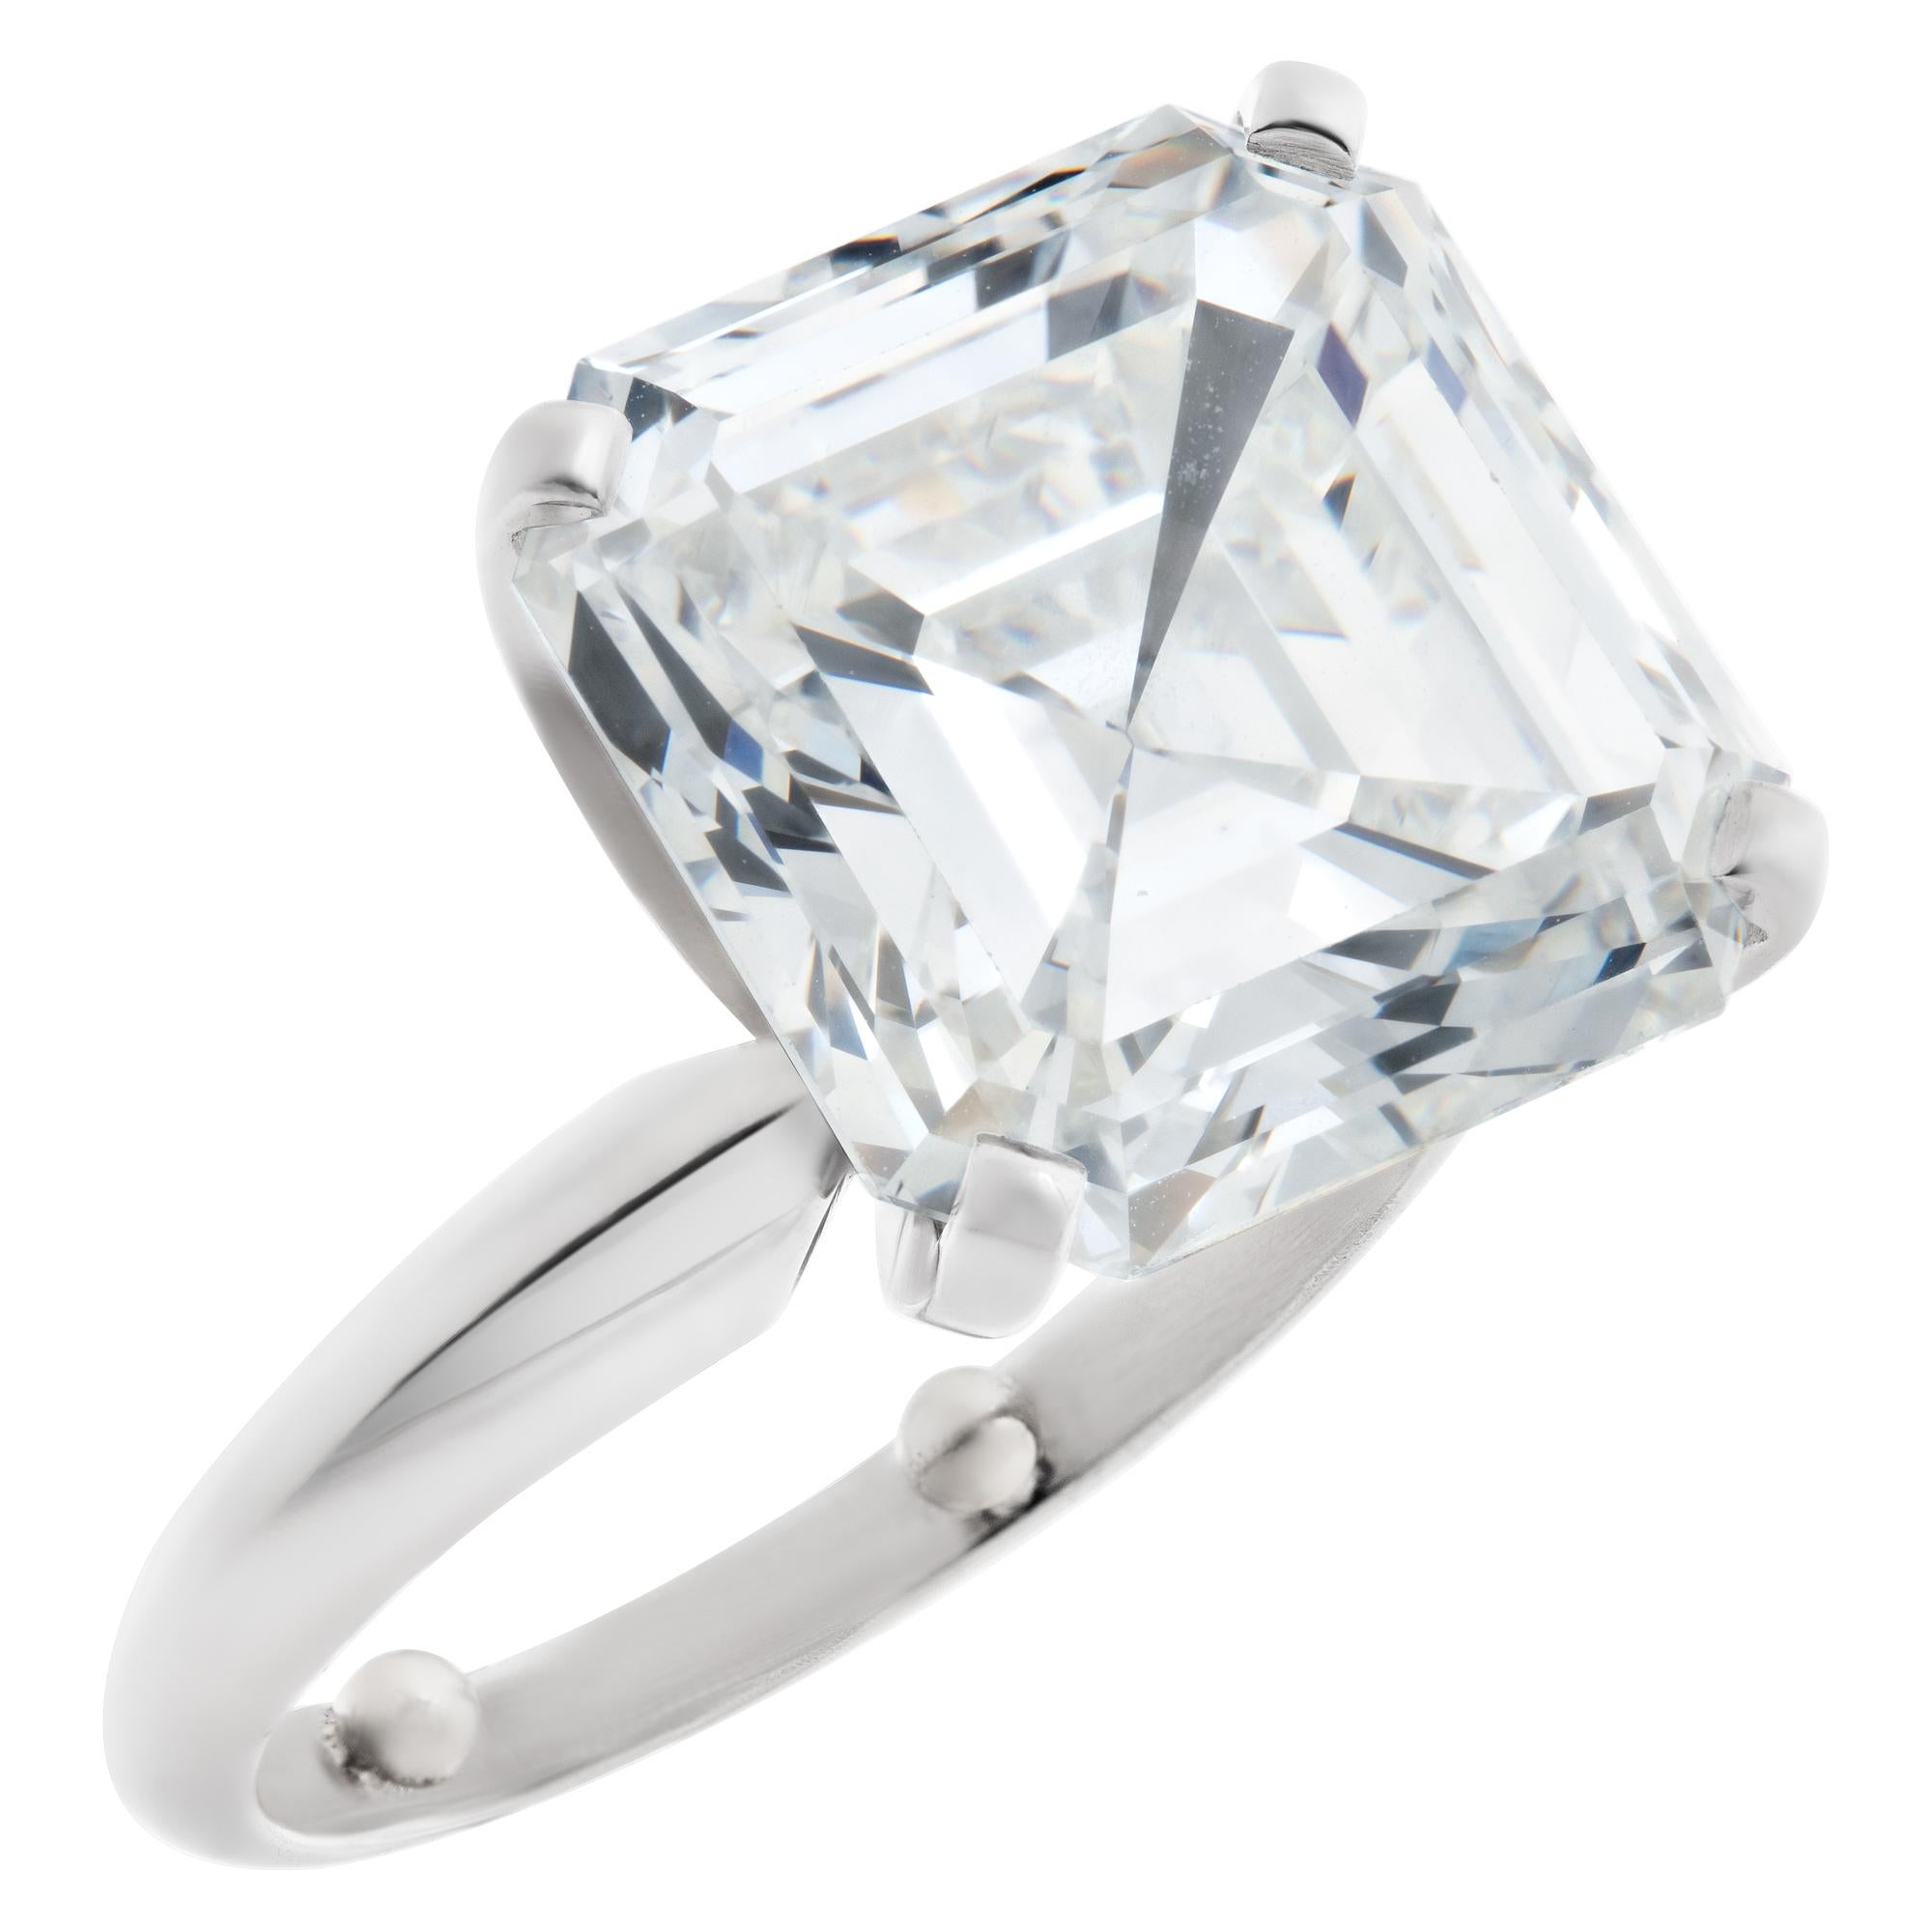 GIA Certified Asscher Cut Diamond 9.03 Carat 'G Color, VS 1 Clarity' Solitaire  In Excellent Condition For Sale In Surfside, FL